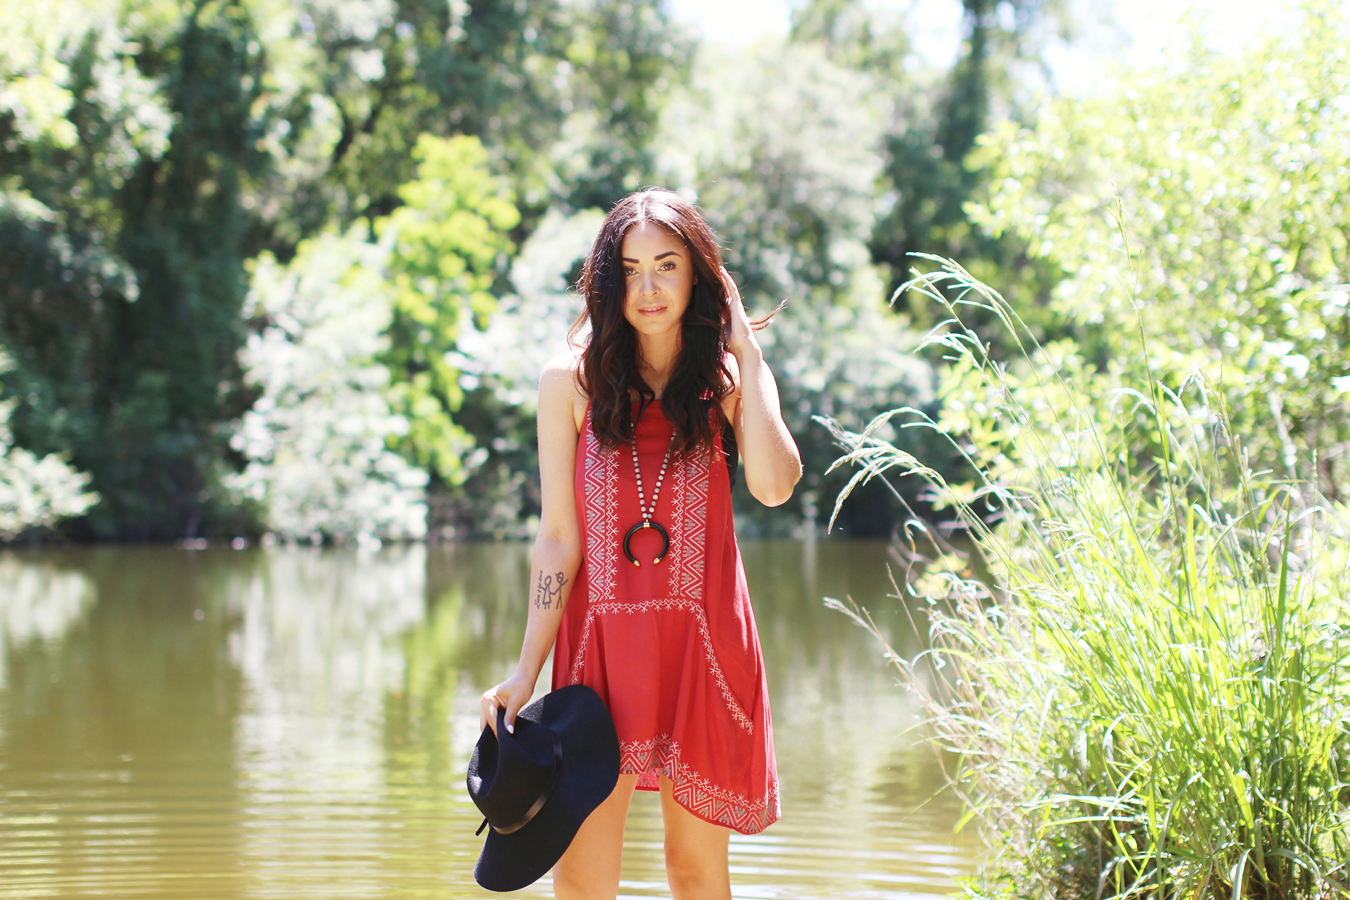 FTT-RED-PINK-SILVER-DRESS-HAT-WATER-FASHION-SHOOT-7